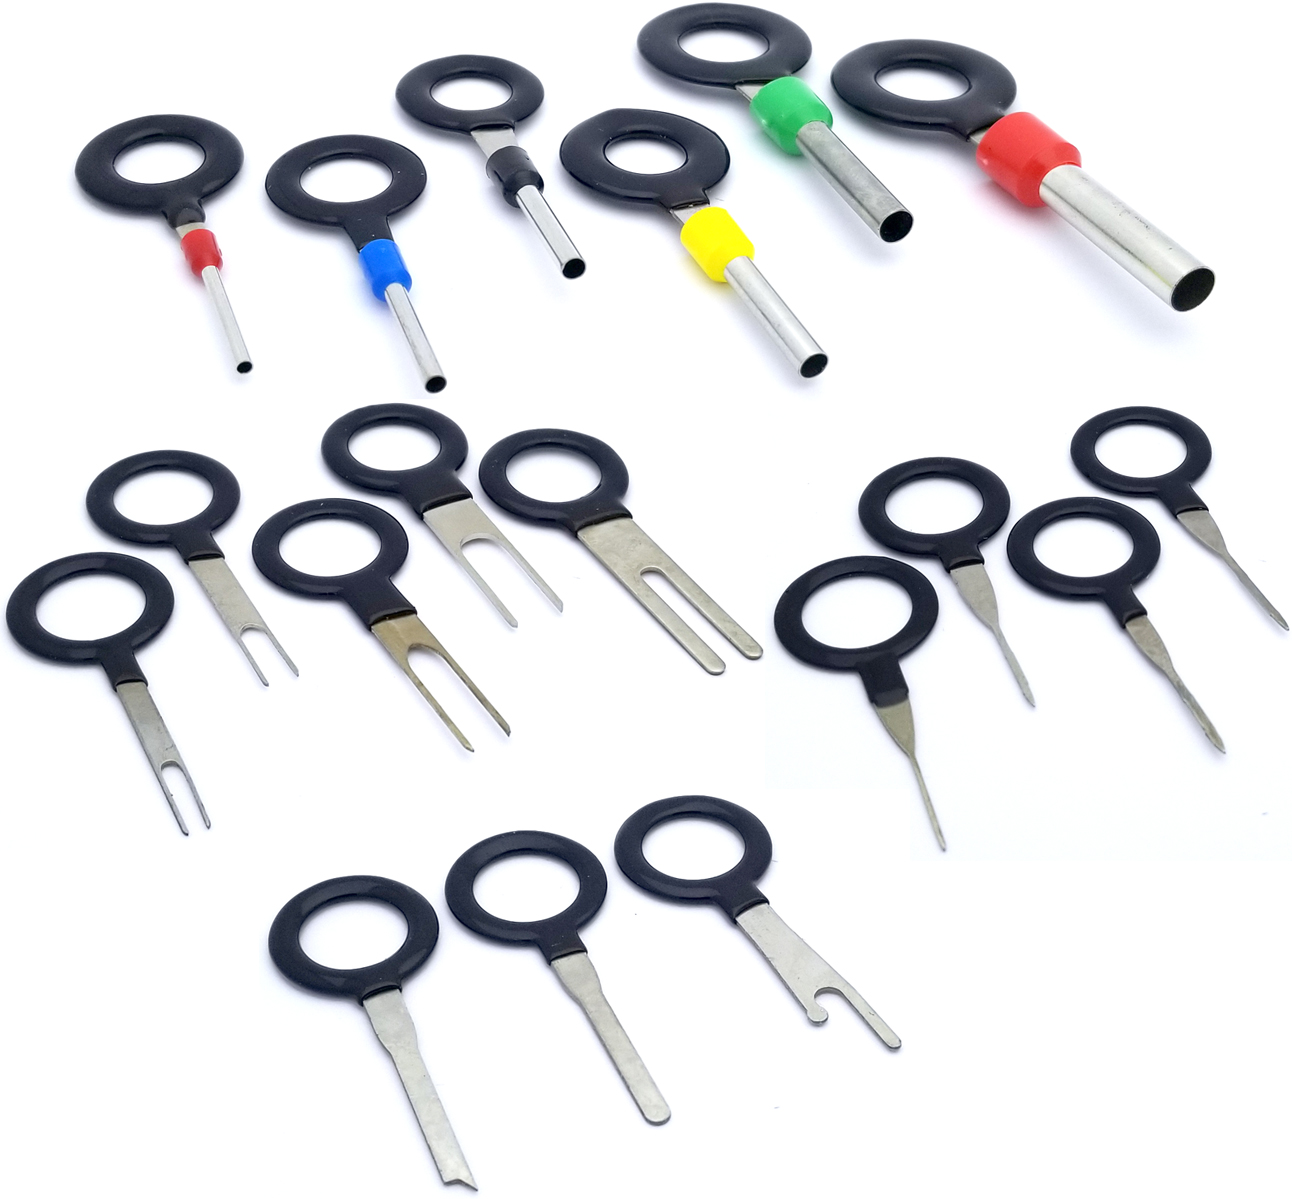 Grosun 36 Pieces Wire Connector Terminal Pins Crimp Connector Pin Wire Harness Terminal Extractor Terminals Removal Tools Extractors Puller Remover Repair Key Tools Set 